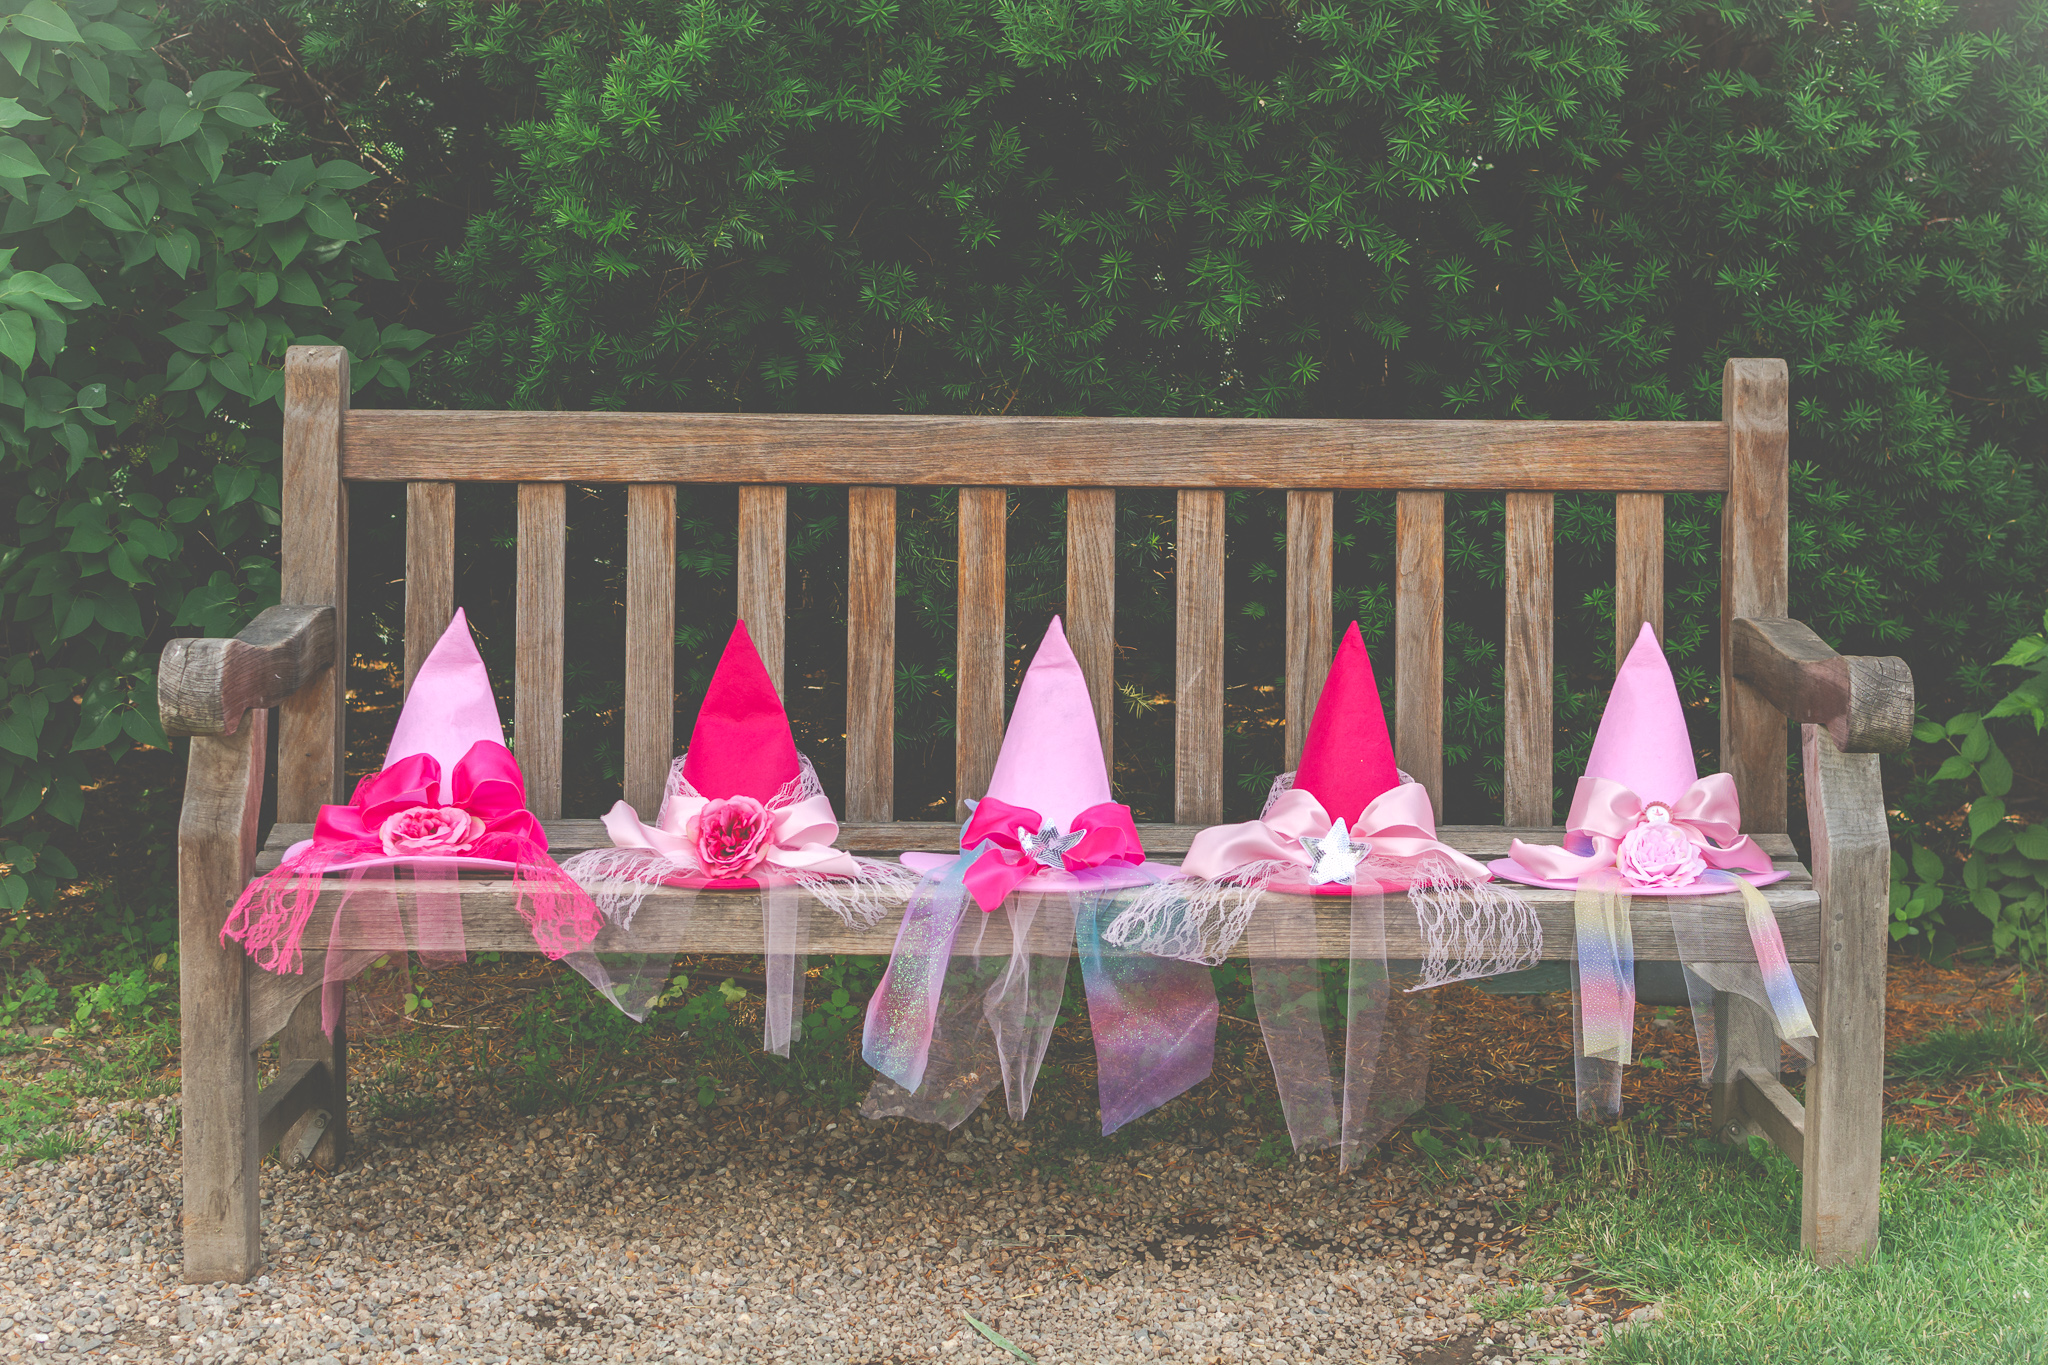 Good Witch Hats on bench Ropes Garden